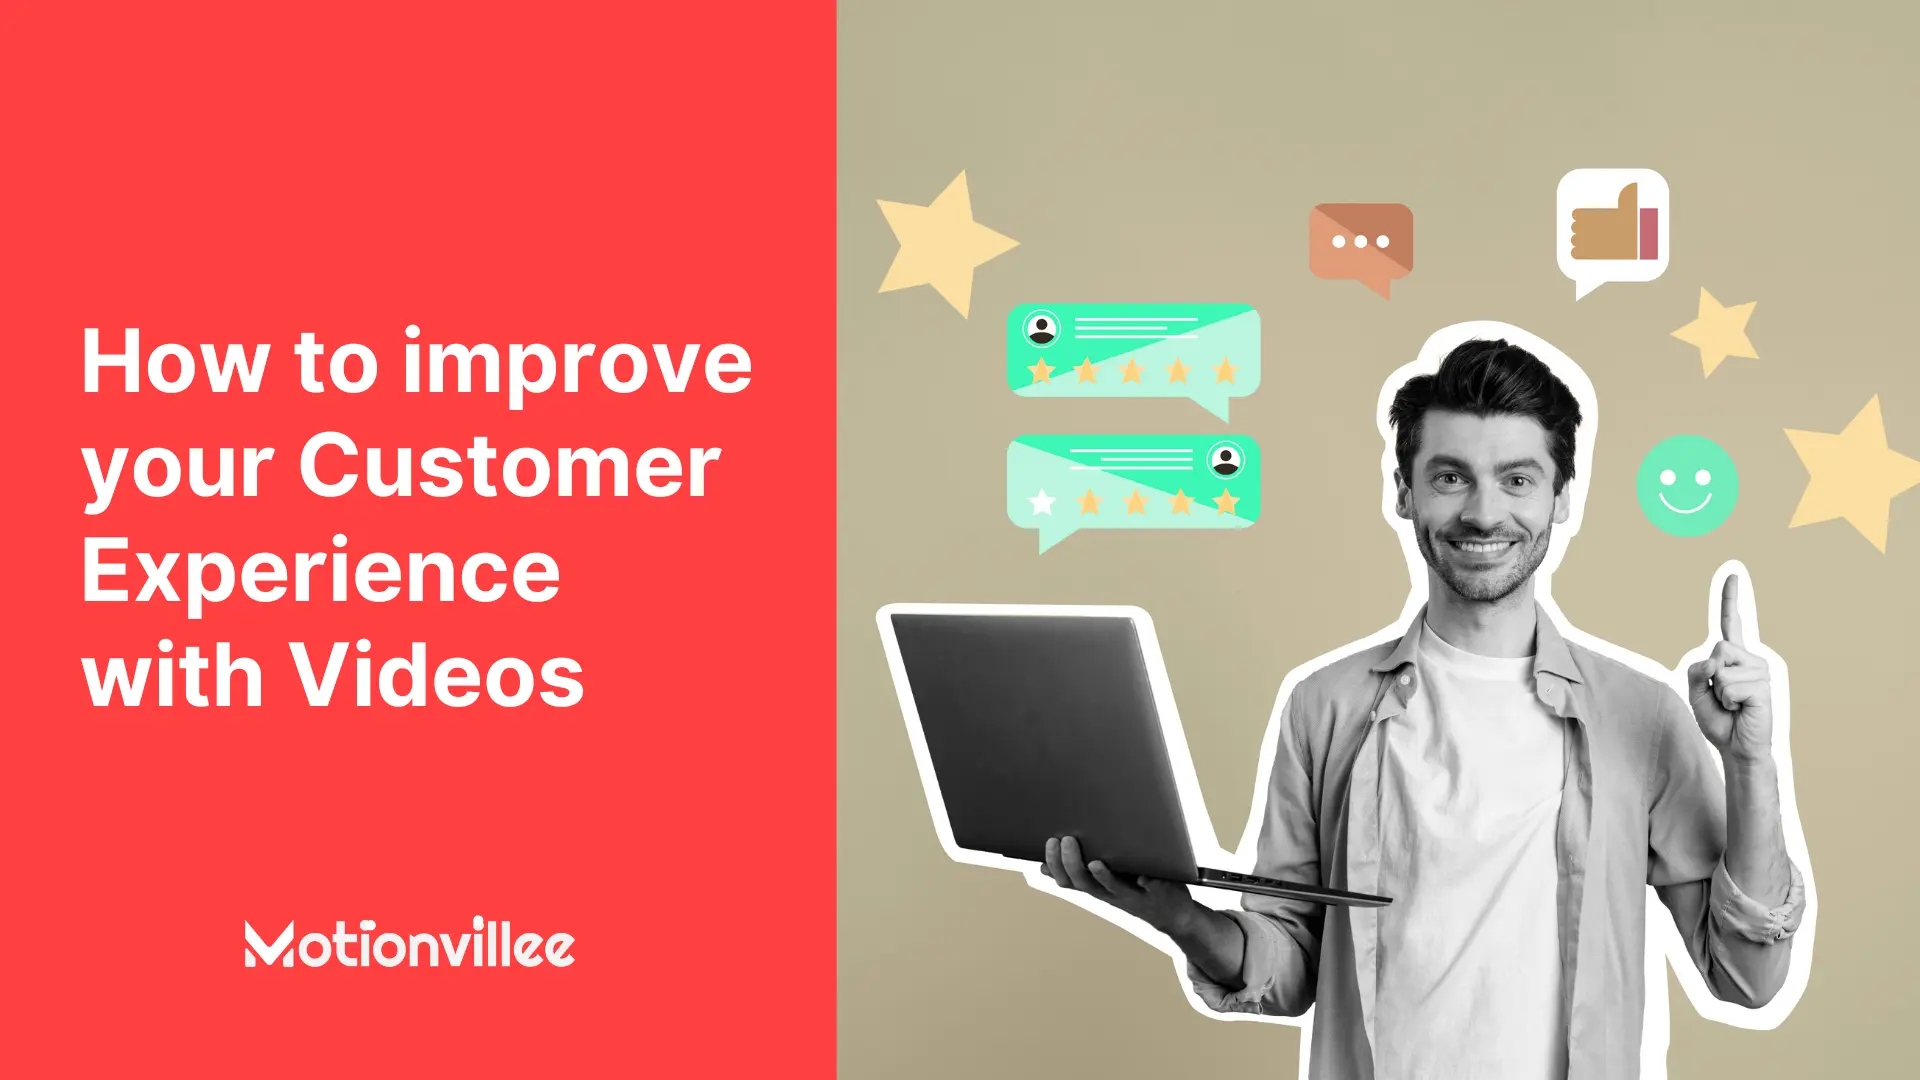 How to improve your Customer Experience with Videos